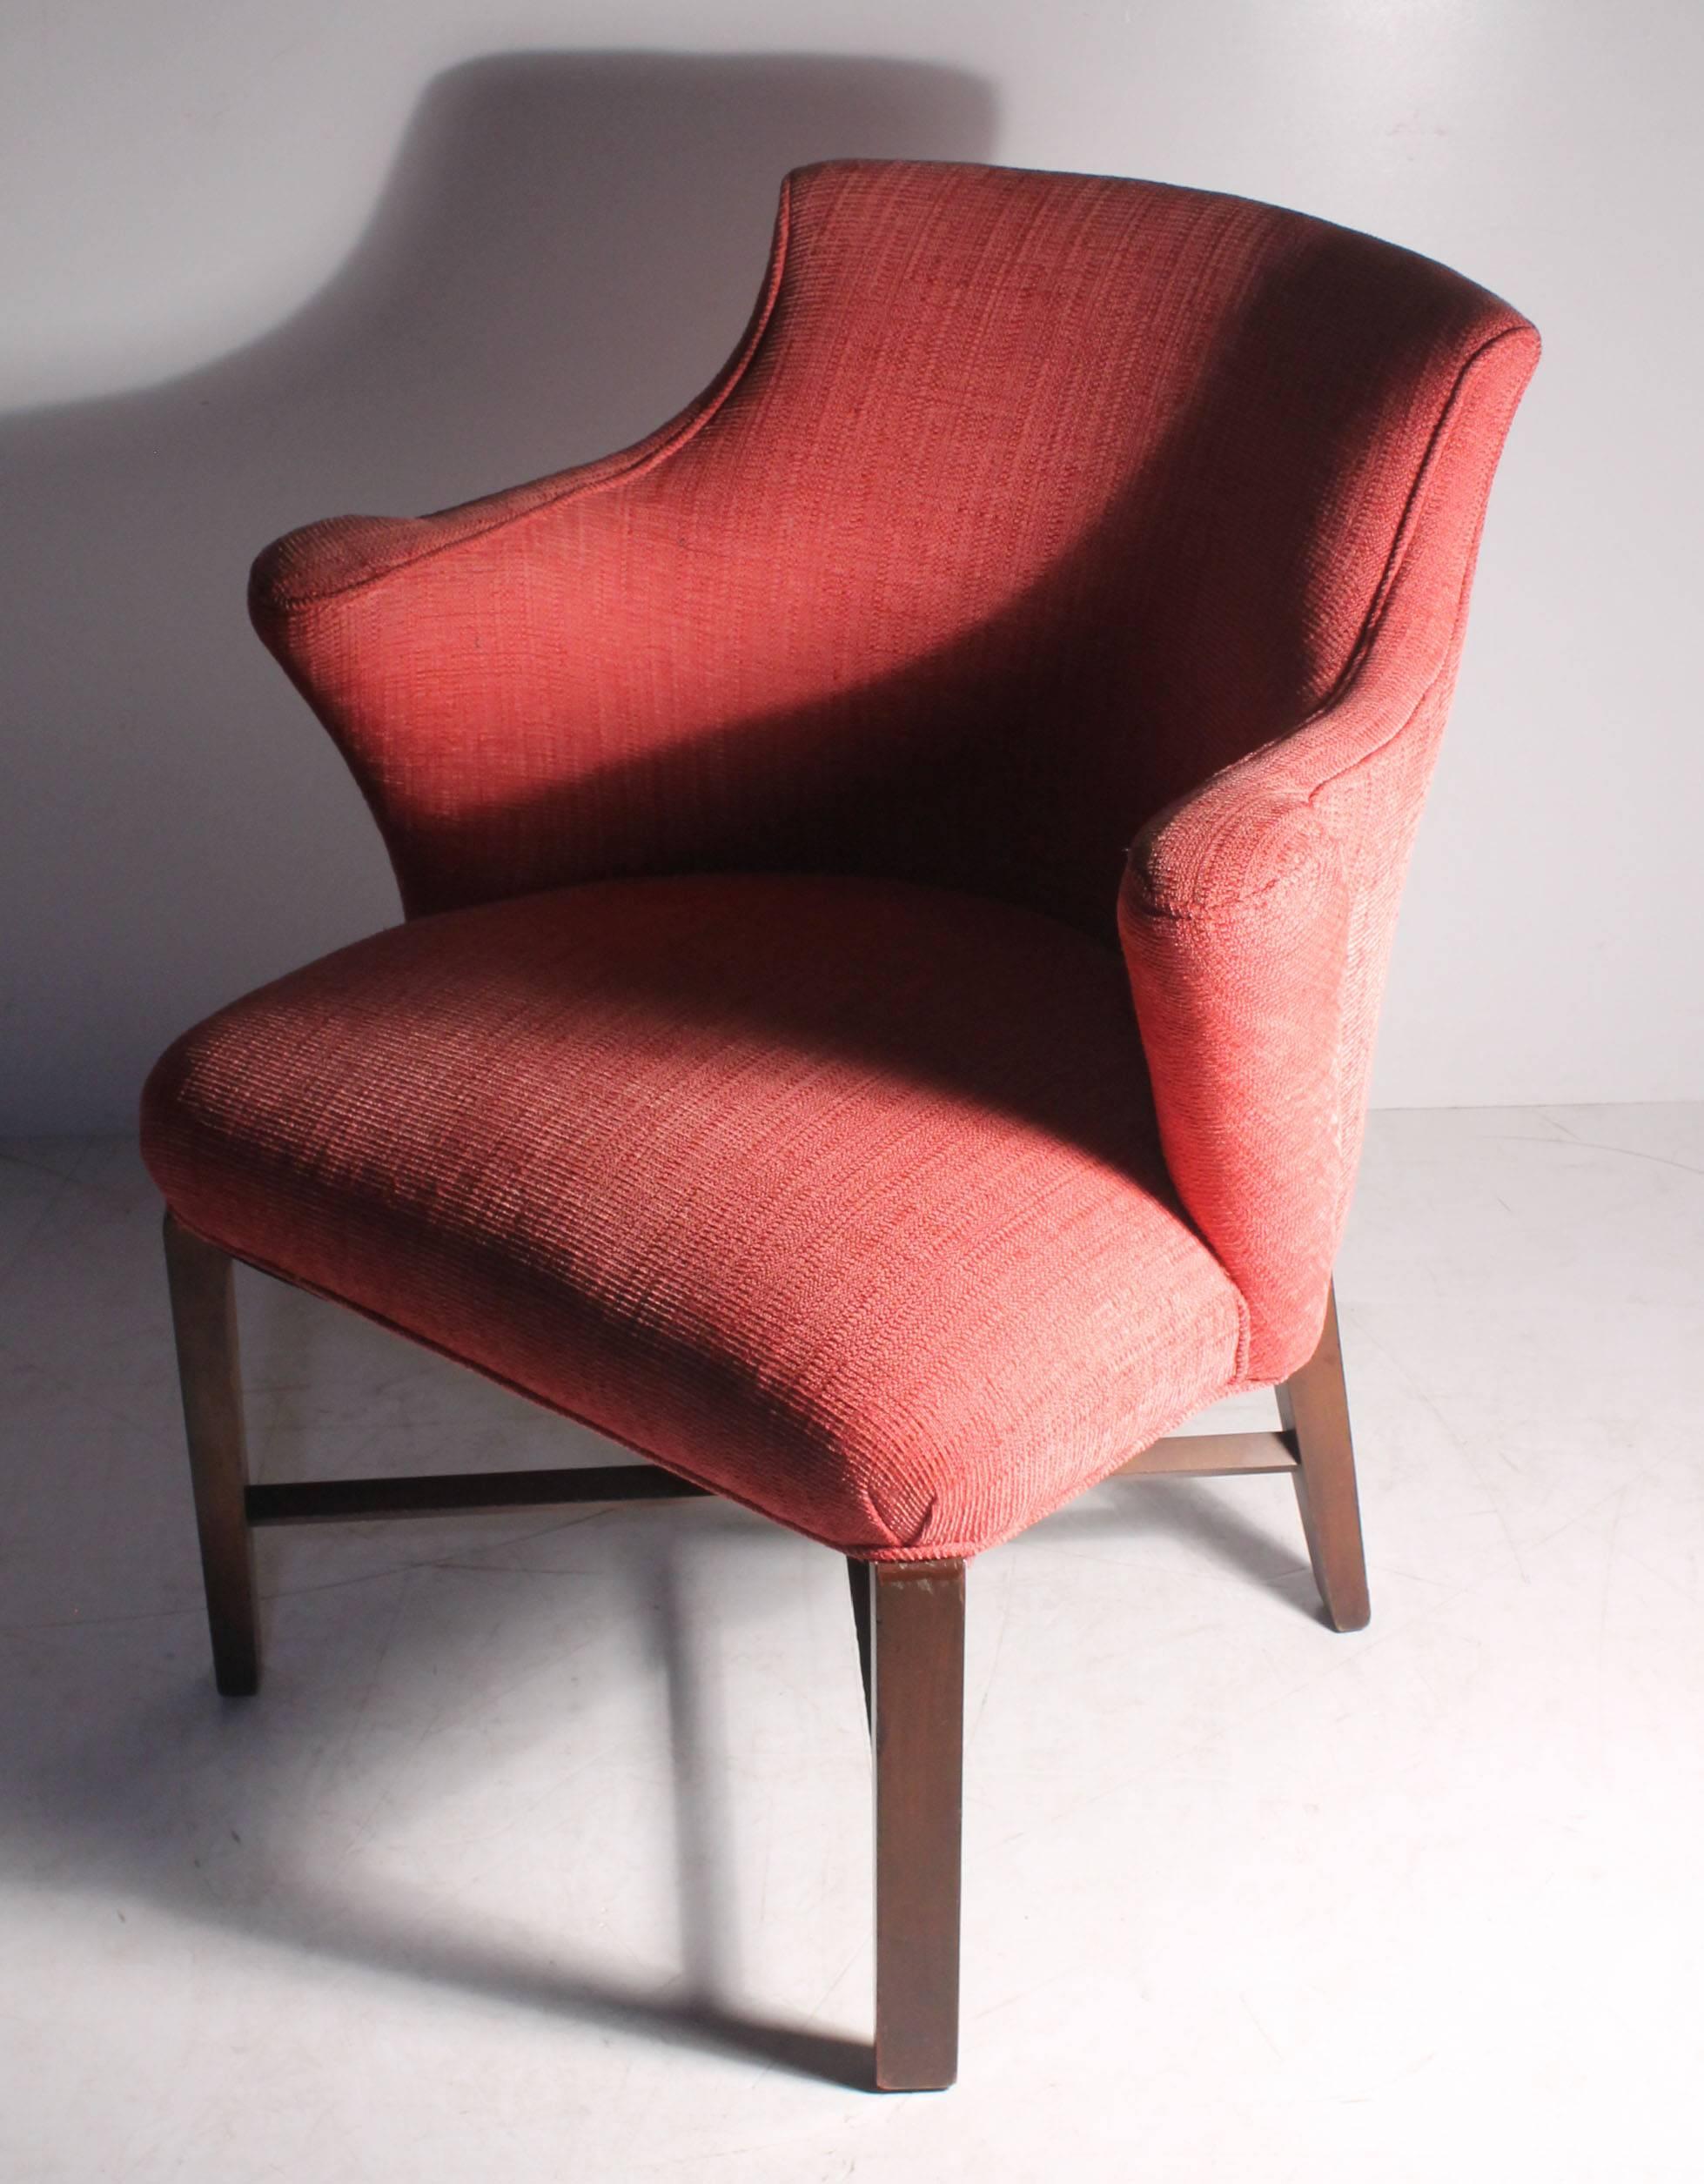 Syrie Maugham Armchairs - 4 Chairs available - Hollywood Regency 1